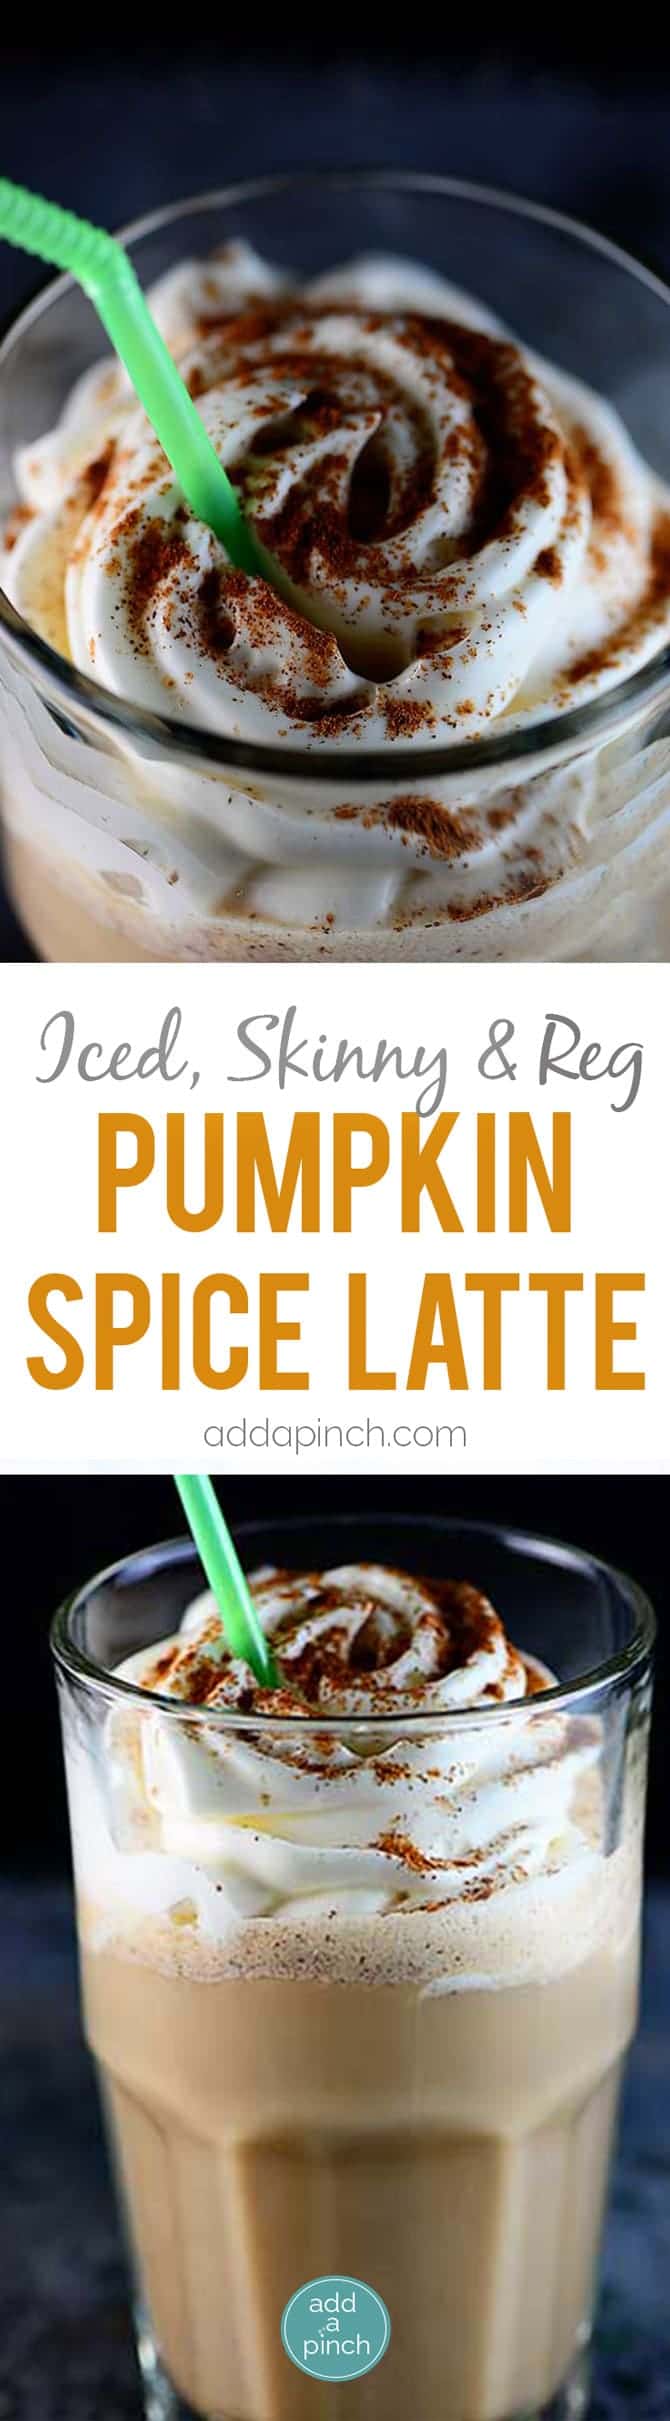 Pumpkin Spice Latte Recipe - Pumpkin Spice Latte makes a welcome addition each fall and now you can enjoy your pumpkin spice latte at home the way you like it: regular, iced or skinny! // addapinch.com